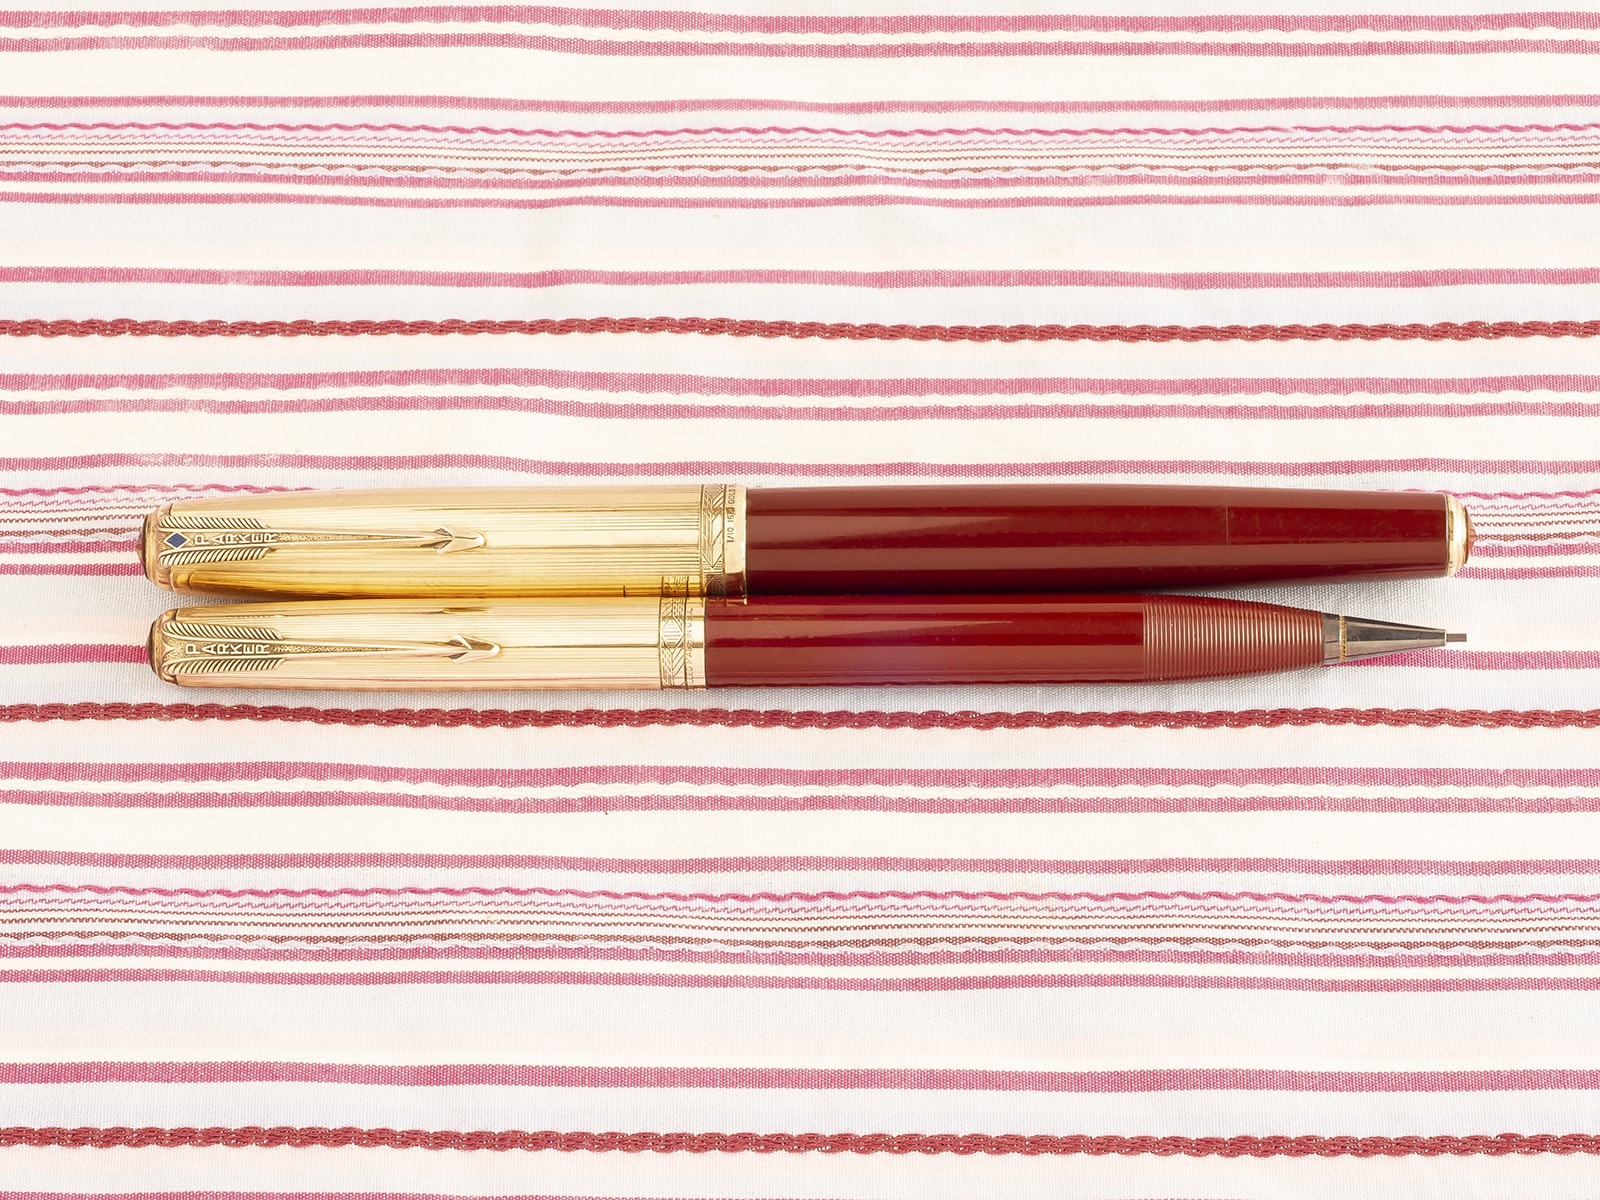 parker 51 deluxe double jewel 16k gold filled cap red maroon fonntain pen pencil box set